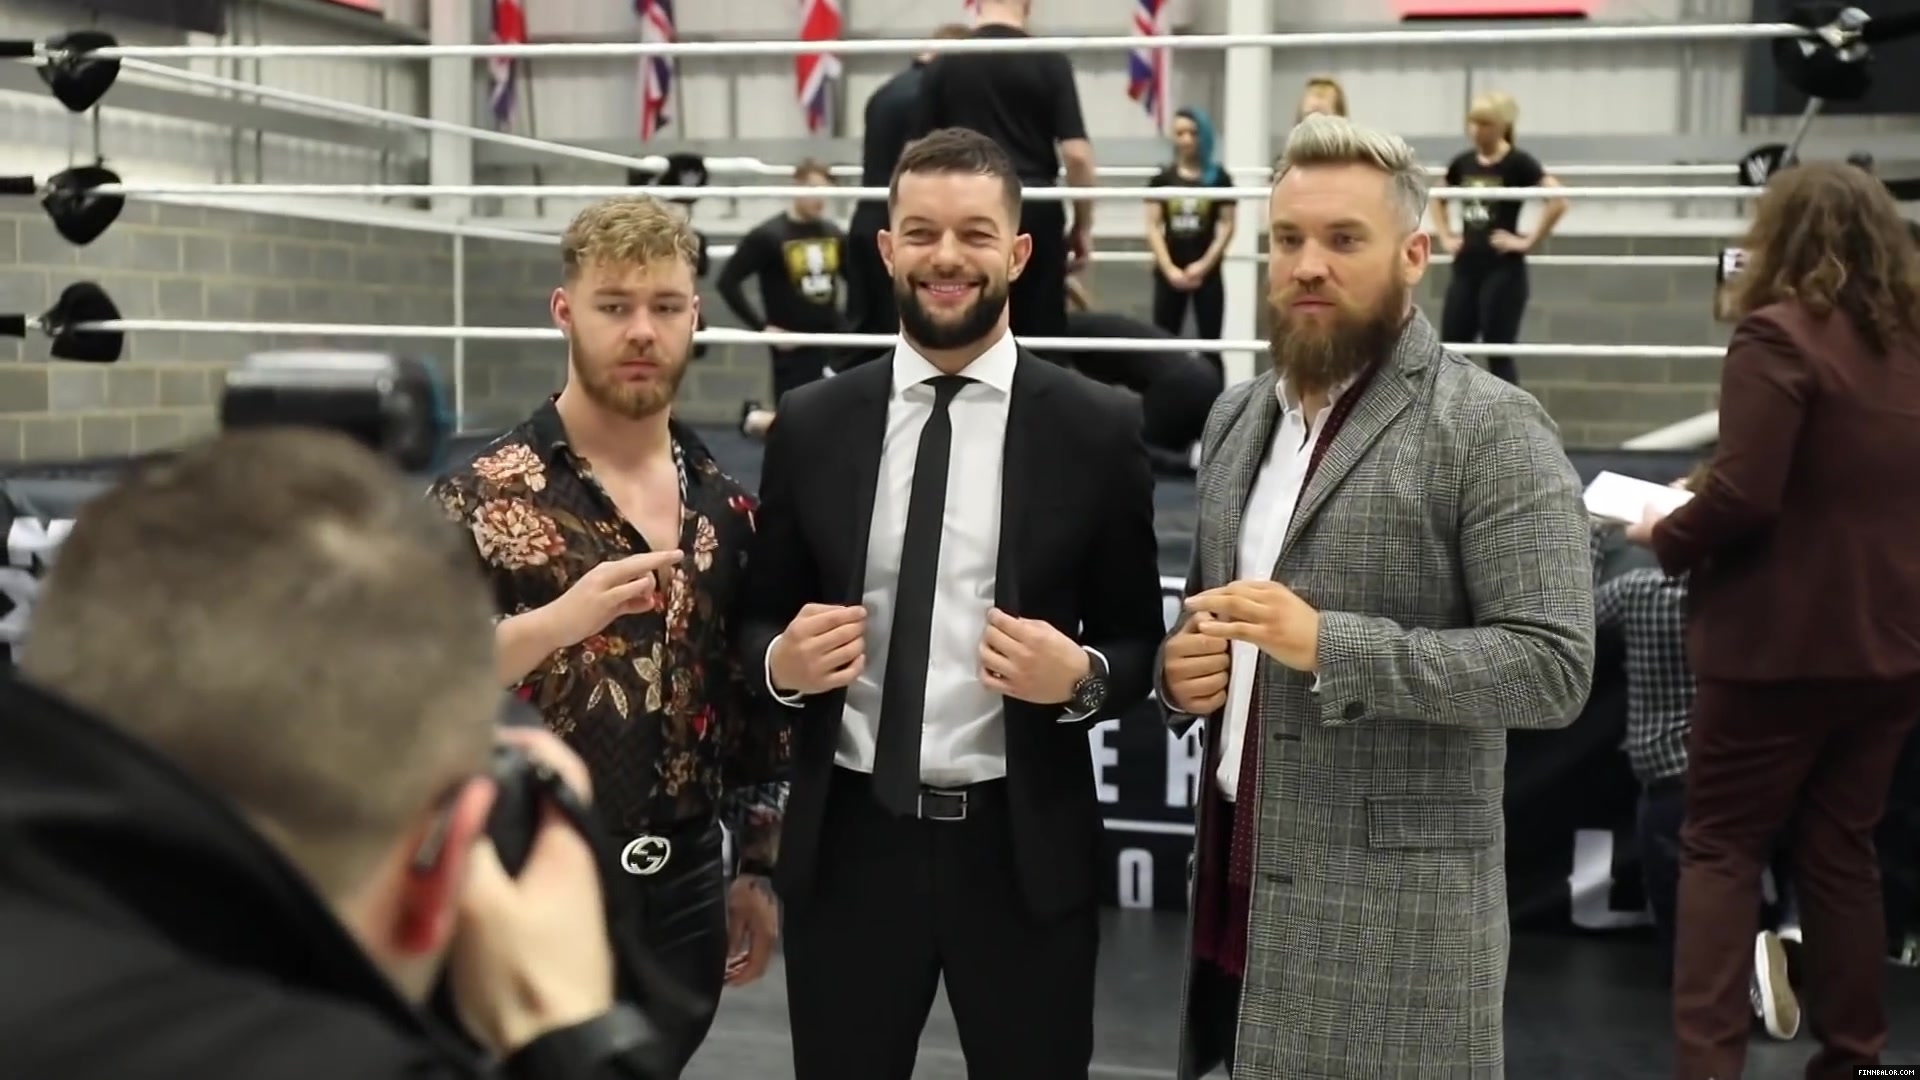 WWE_Superstar_FINN_BALOR_joins_MOUSTACHE_MOUNTAIN_at_the_opening_of_the_NXT_UK_PC_037.jpg